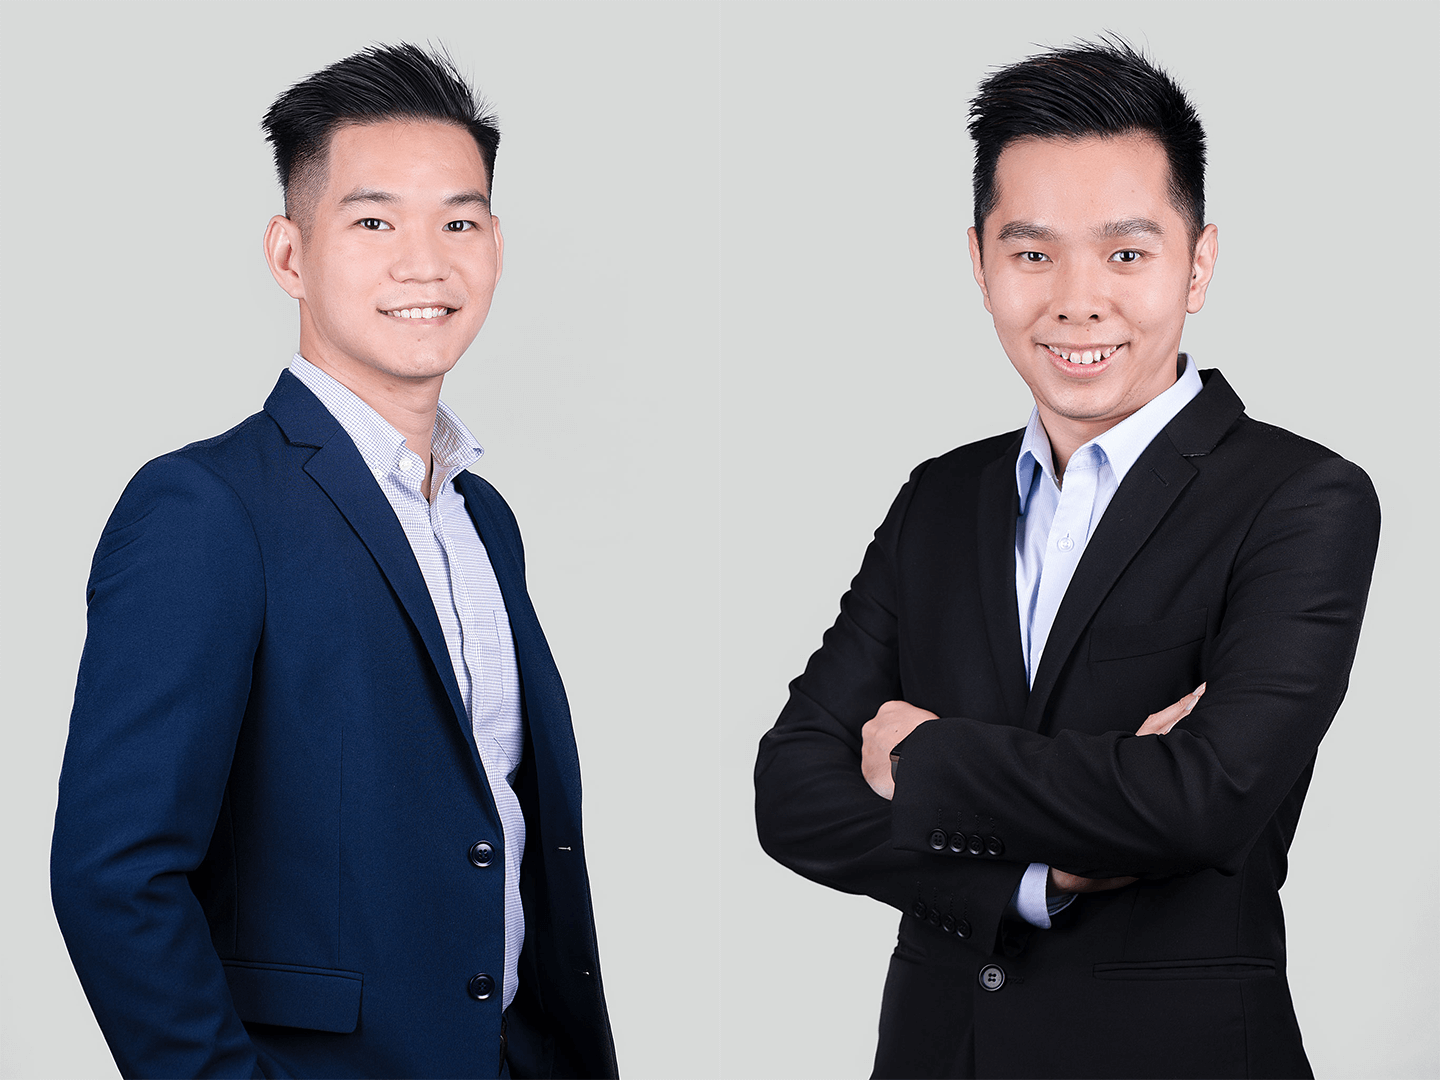 Paessler Strengthens Asia Pacific Presence with New Appointments Amid Strong Growth Momentum